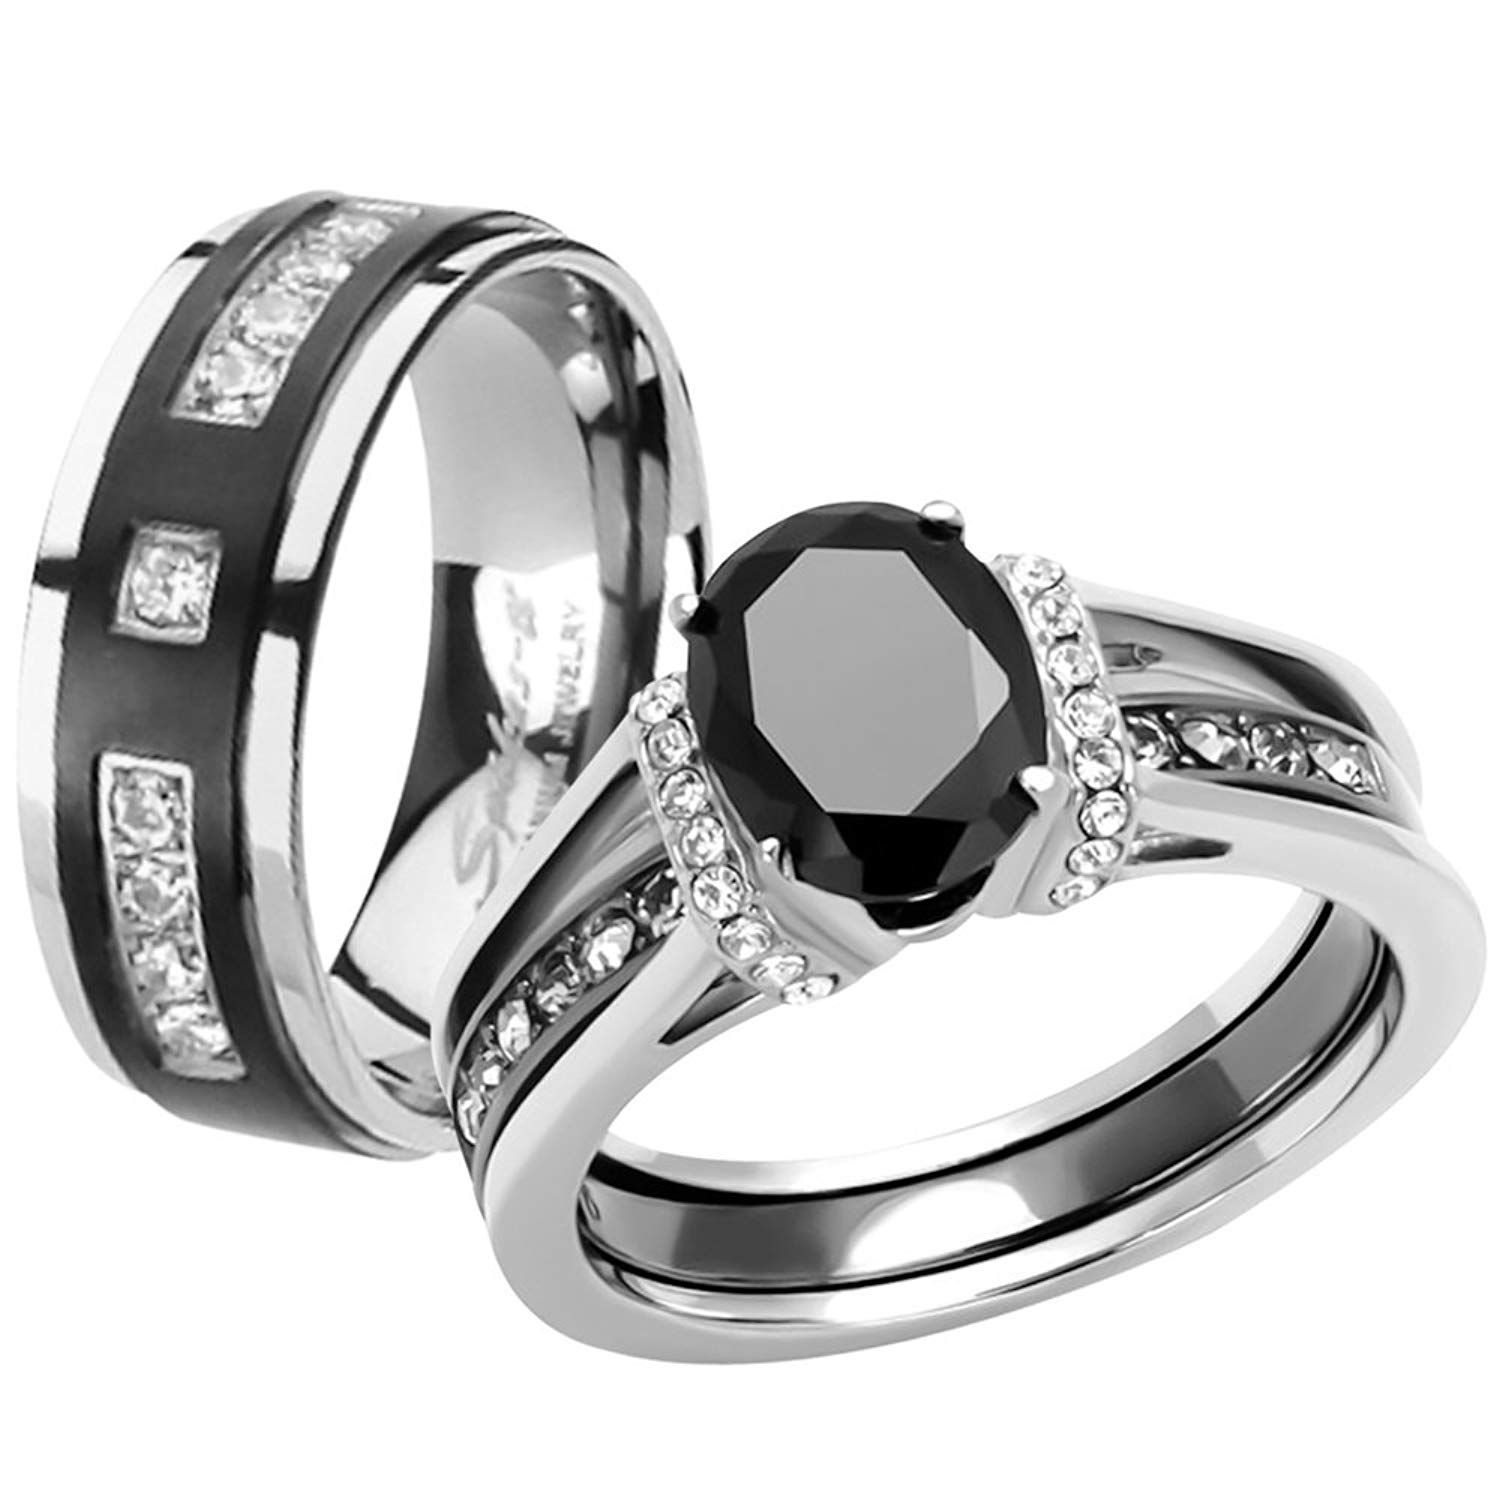 Her and His Black Cz Stainless Steel Wedding Engagement Ring and ...